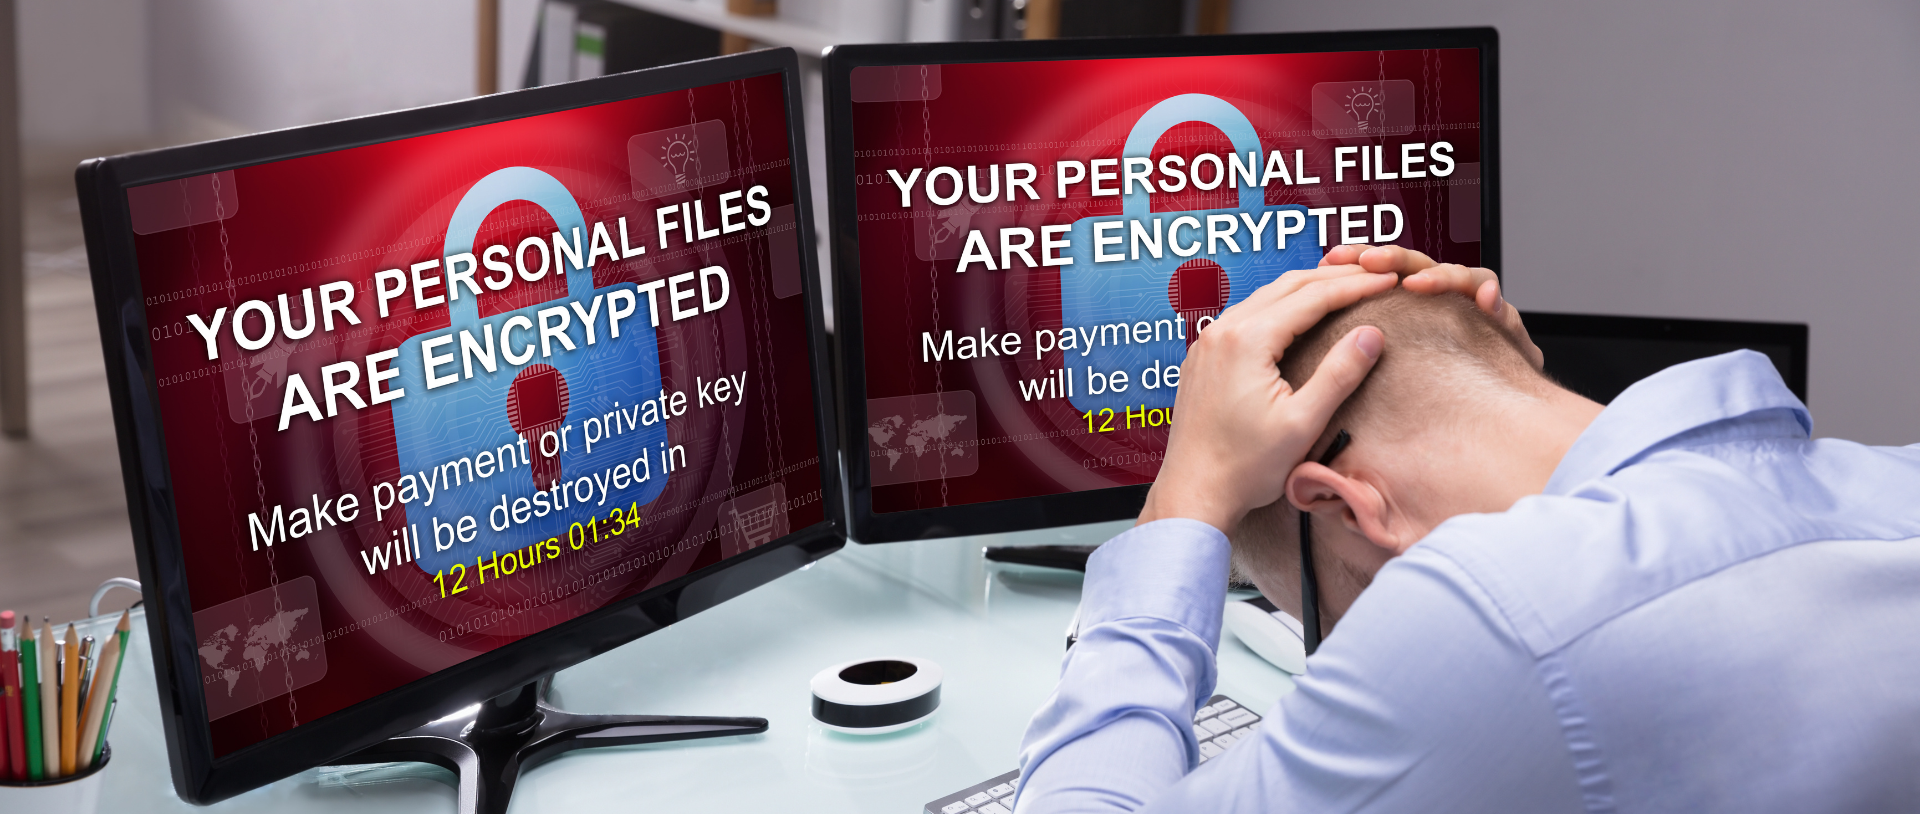 Backup, block, filter, test, refresh and track may sound like some sort of dance or sports move, but they are in fact vital steps to protect yourself from ransomware.